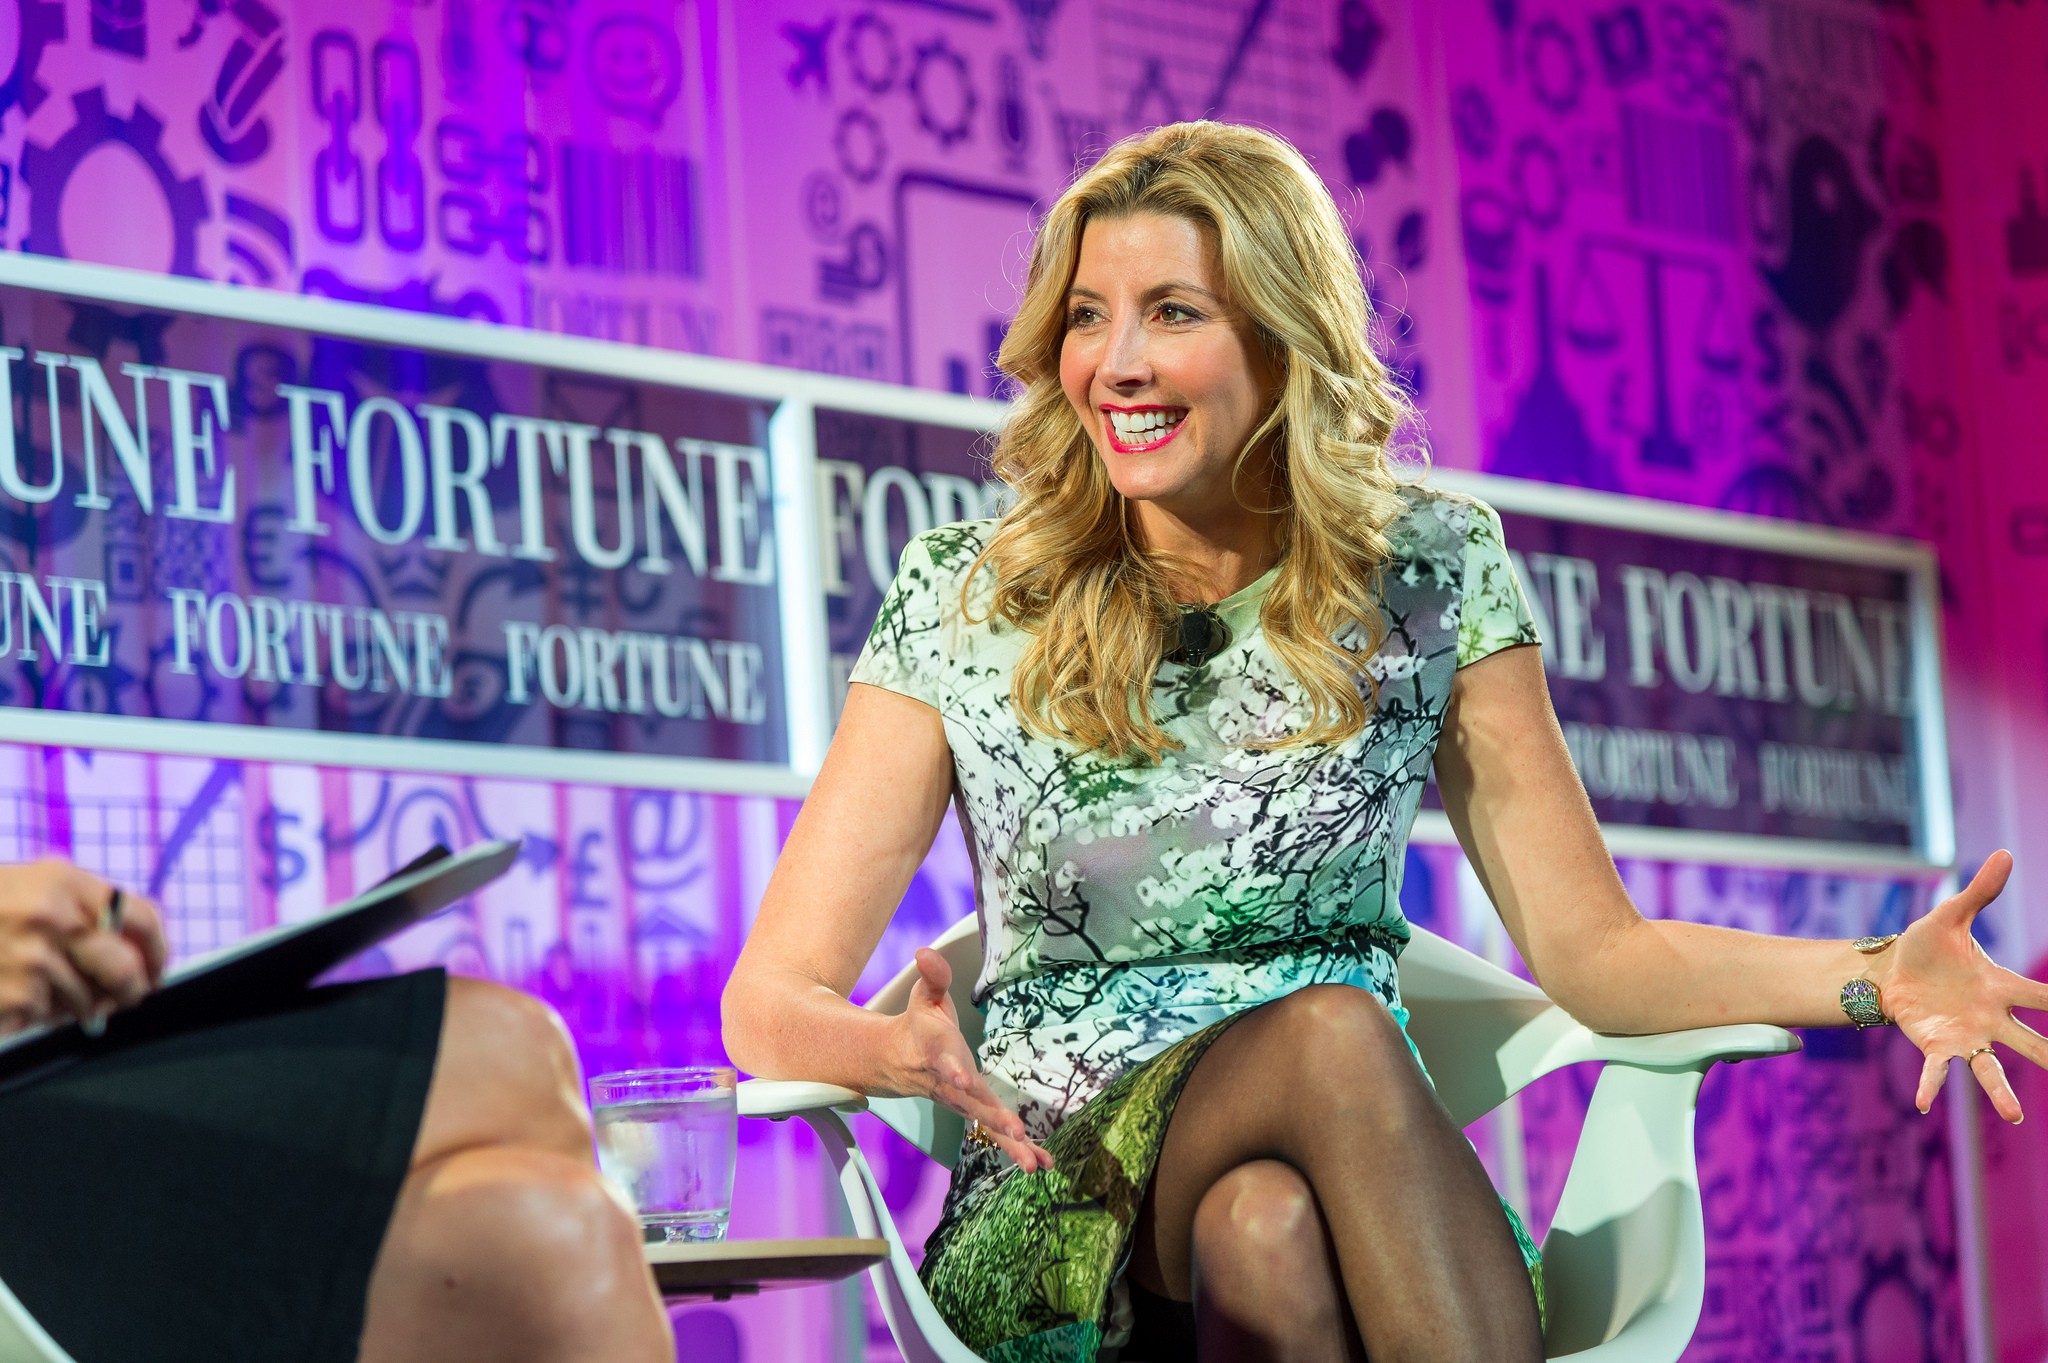 What we learn from Sara Blakely, inventor of Spanx